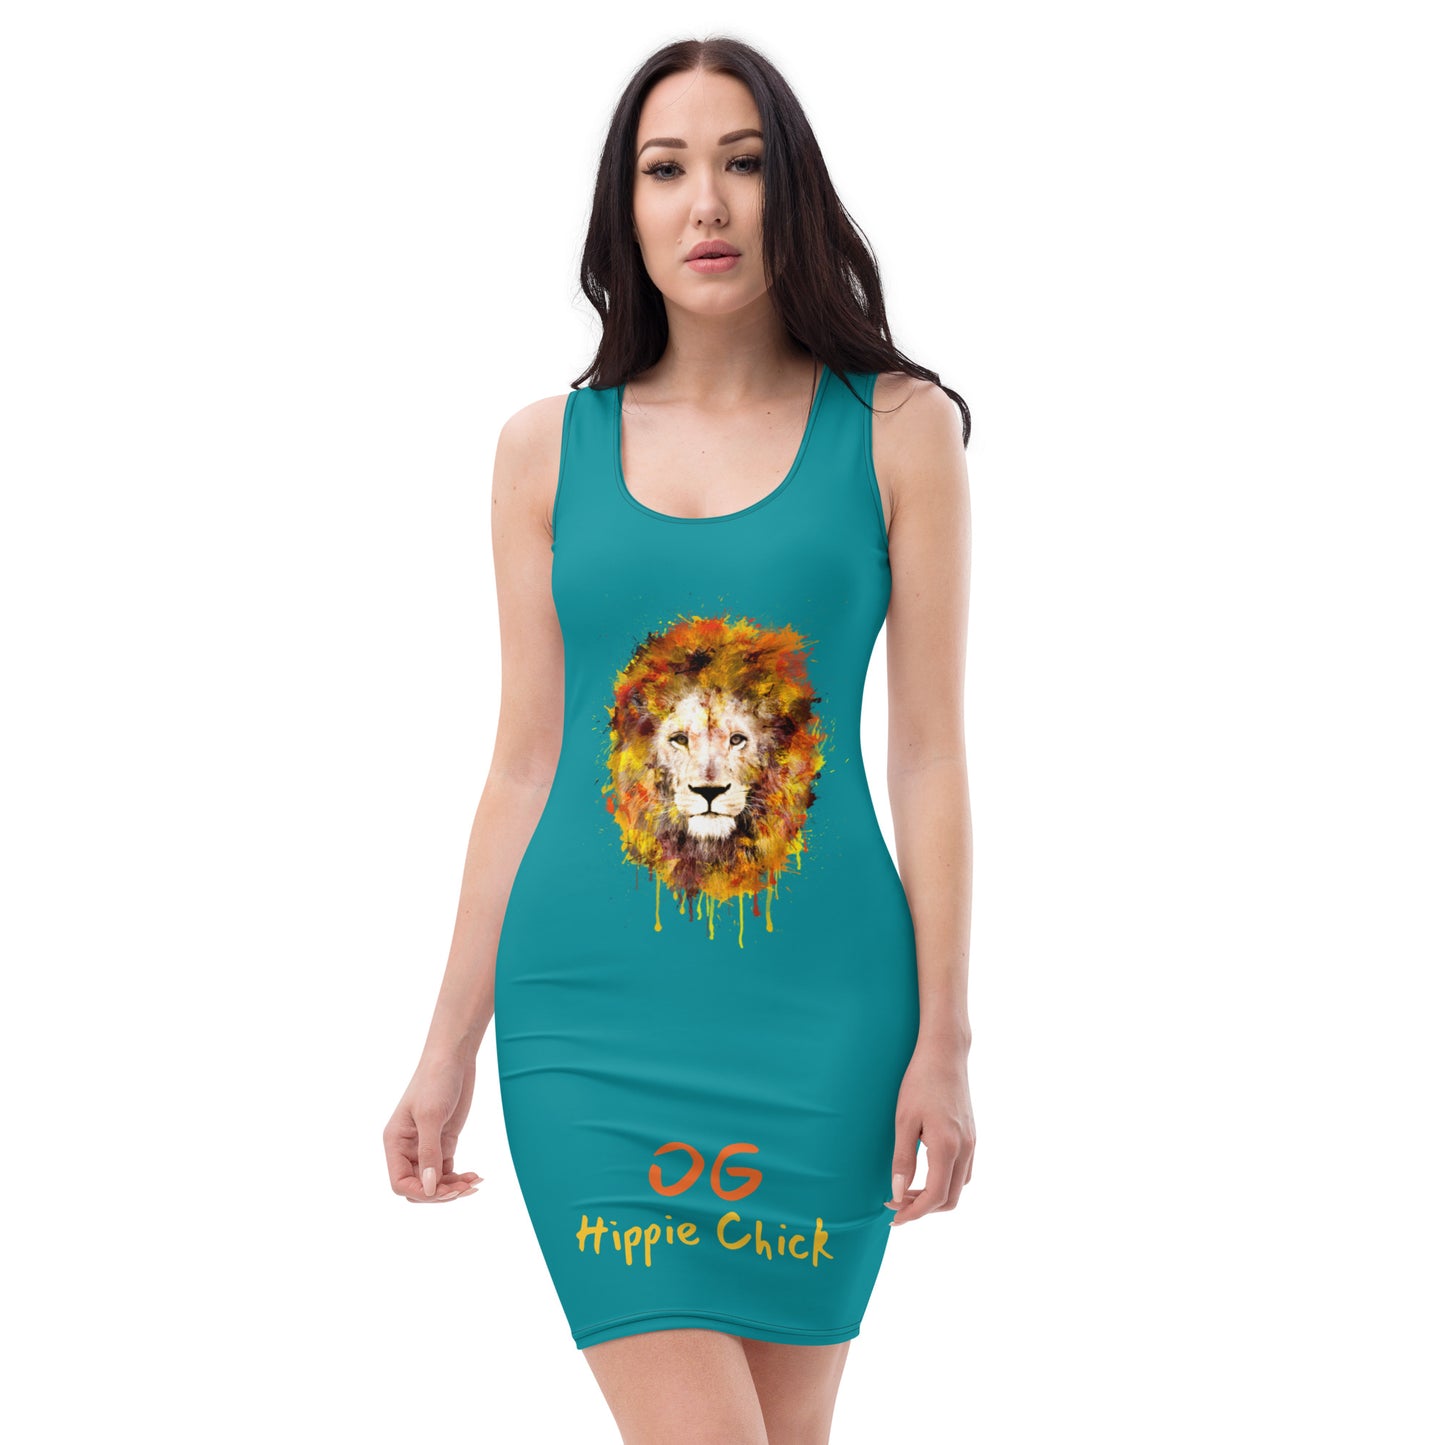 Teal Fitted Dress (Lion front)